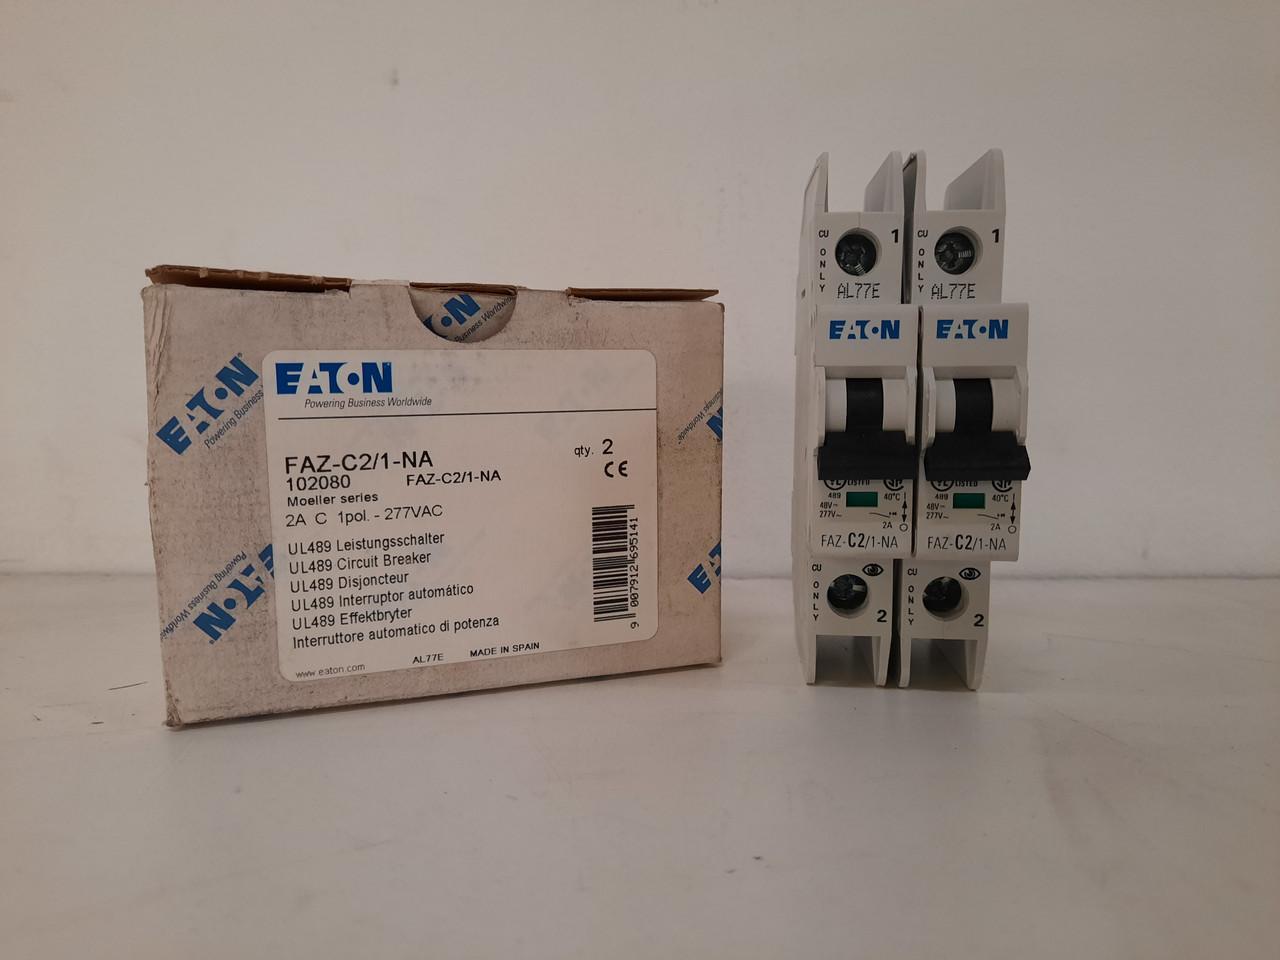 Eaton FAZ-C2/1-NA 277/480 VAC 50/60 Hz, 2 A, 1-Pole, 10/14 kA, 5 to 10 x Rated Current, Screw Terminal, DIN Rail Mount, Standard Packaging, C-Curve, Current Limiting, Thermal Magnetic, Miniature Circuit Breaker